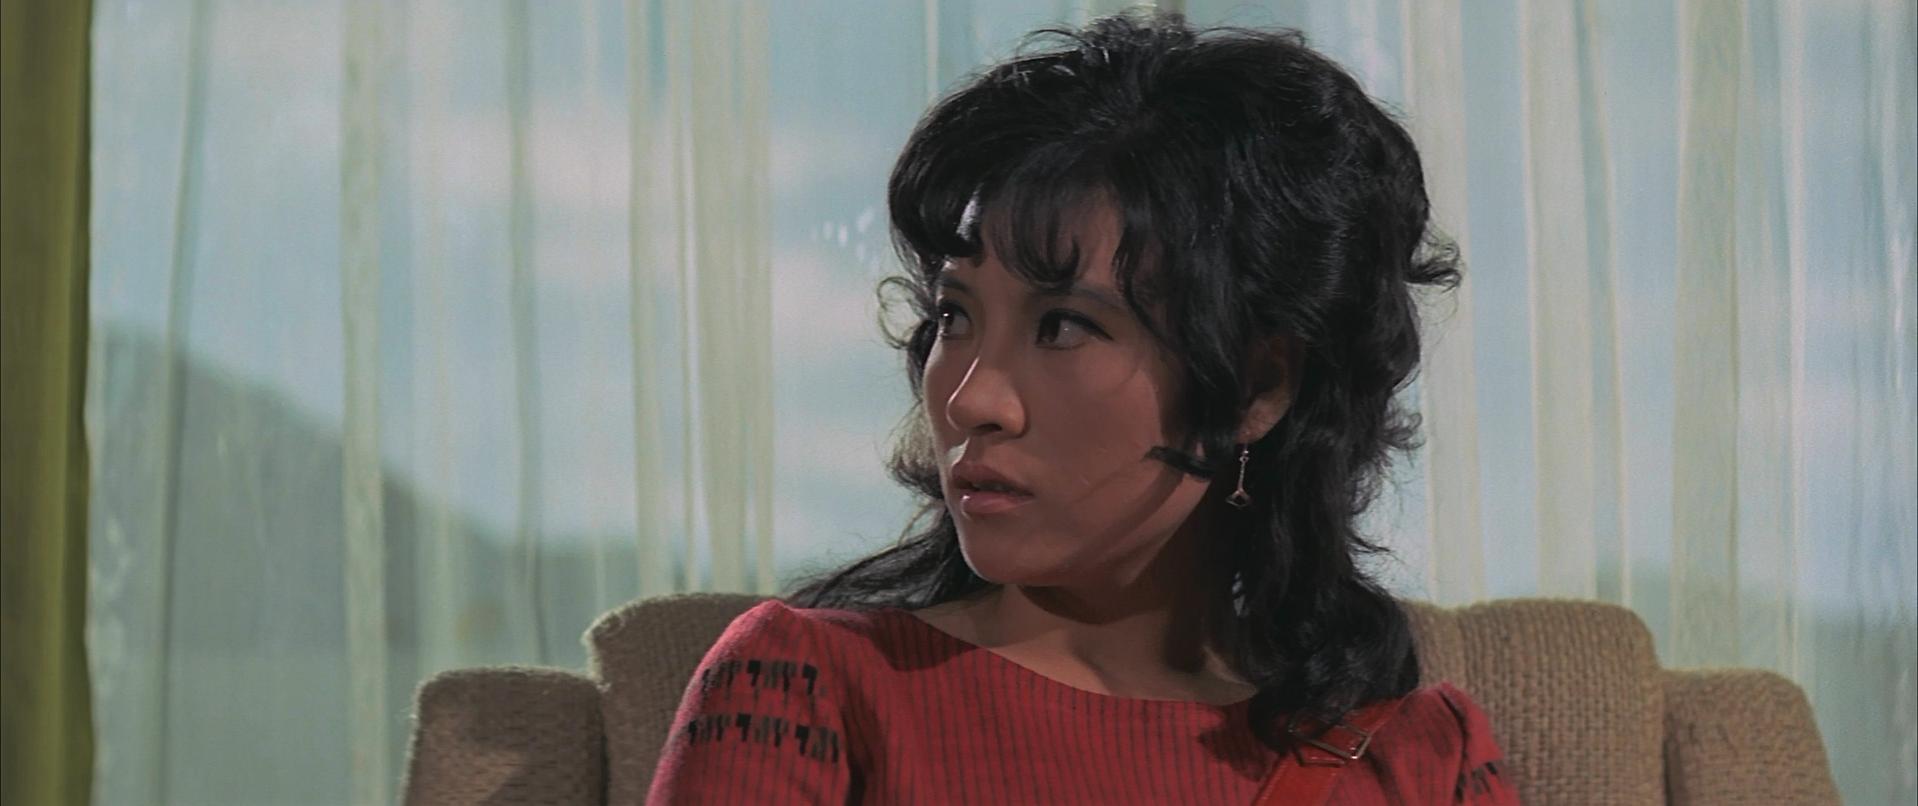 The Angry Guest (1972) Screenshot 4 